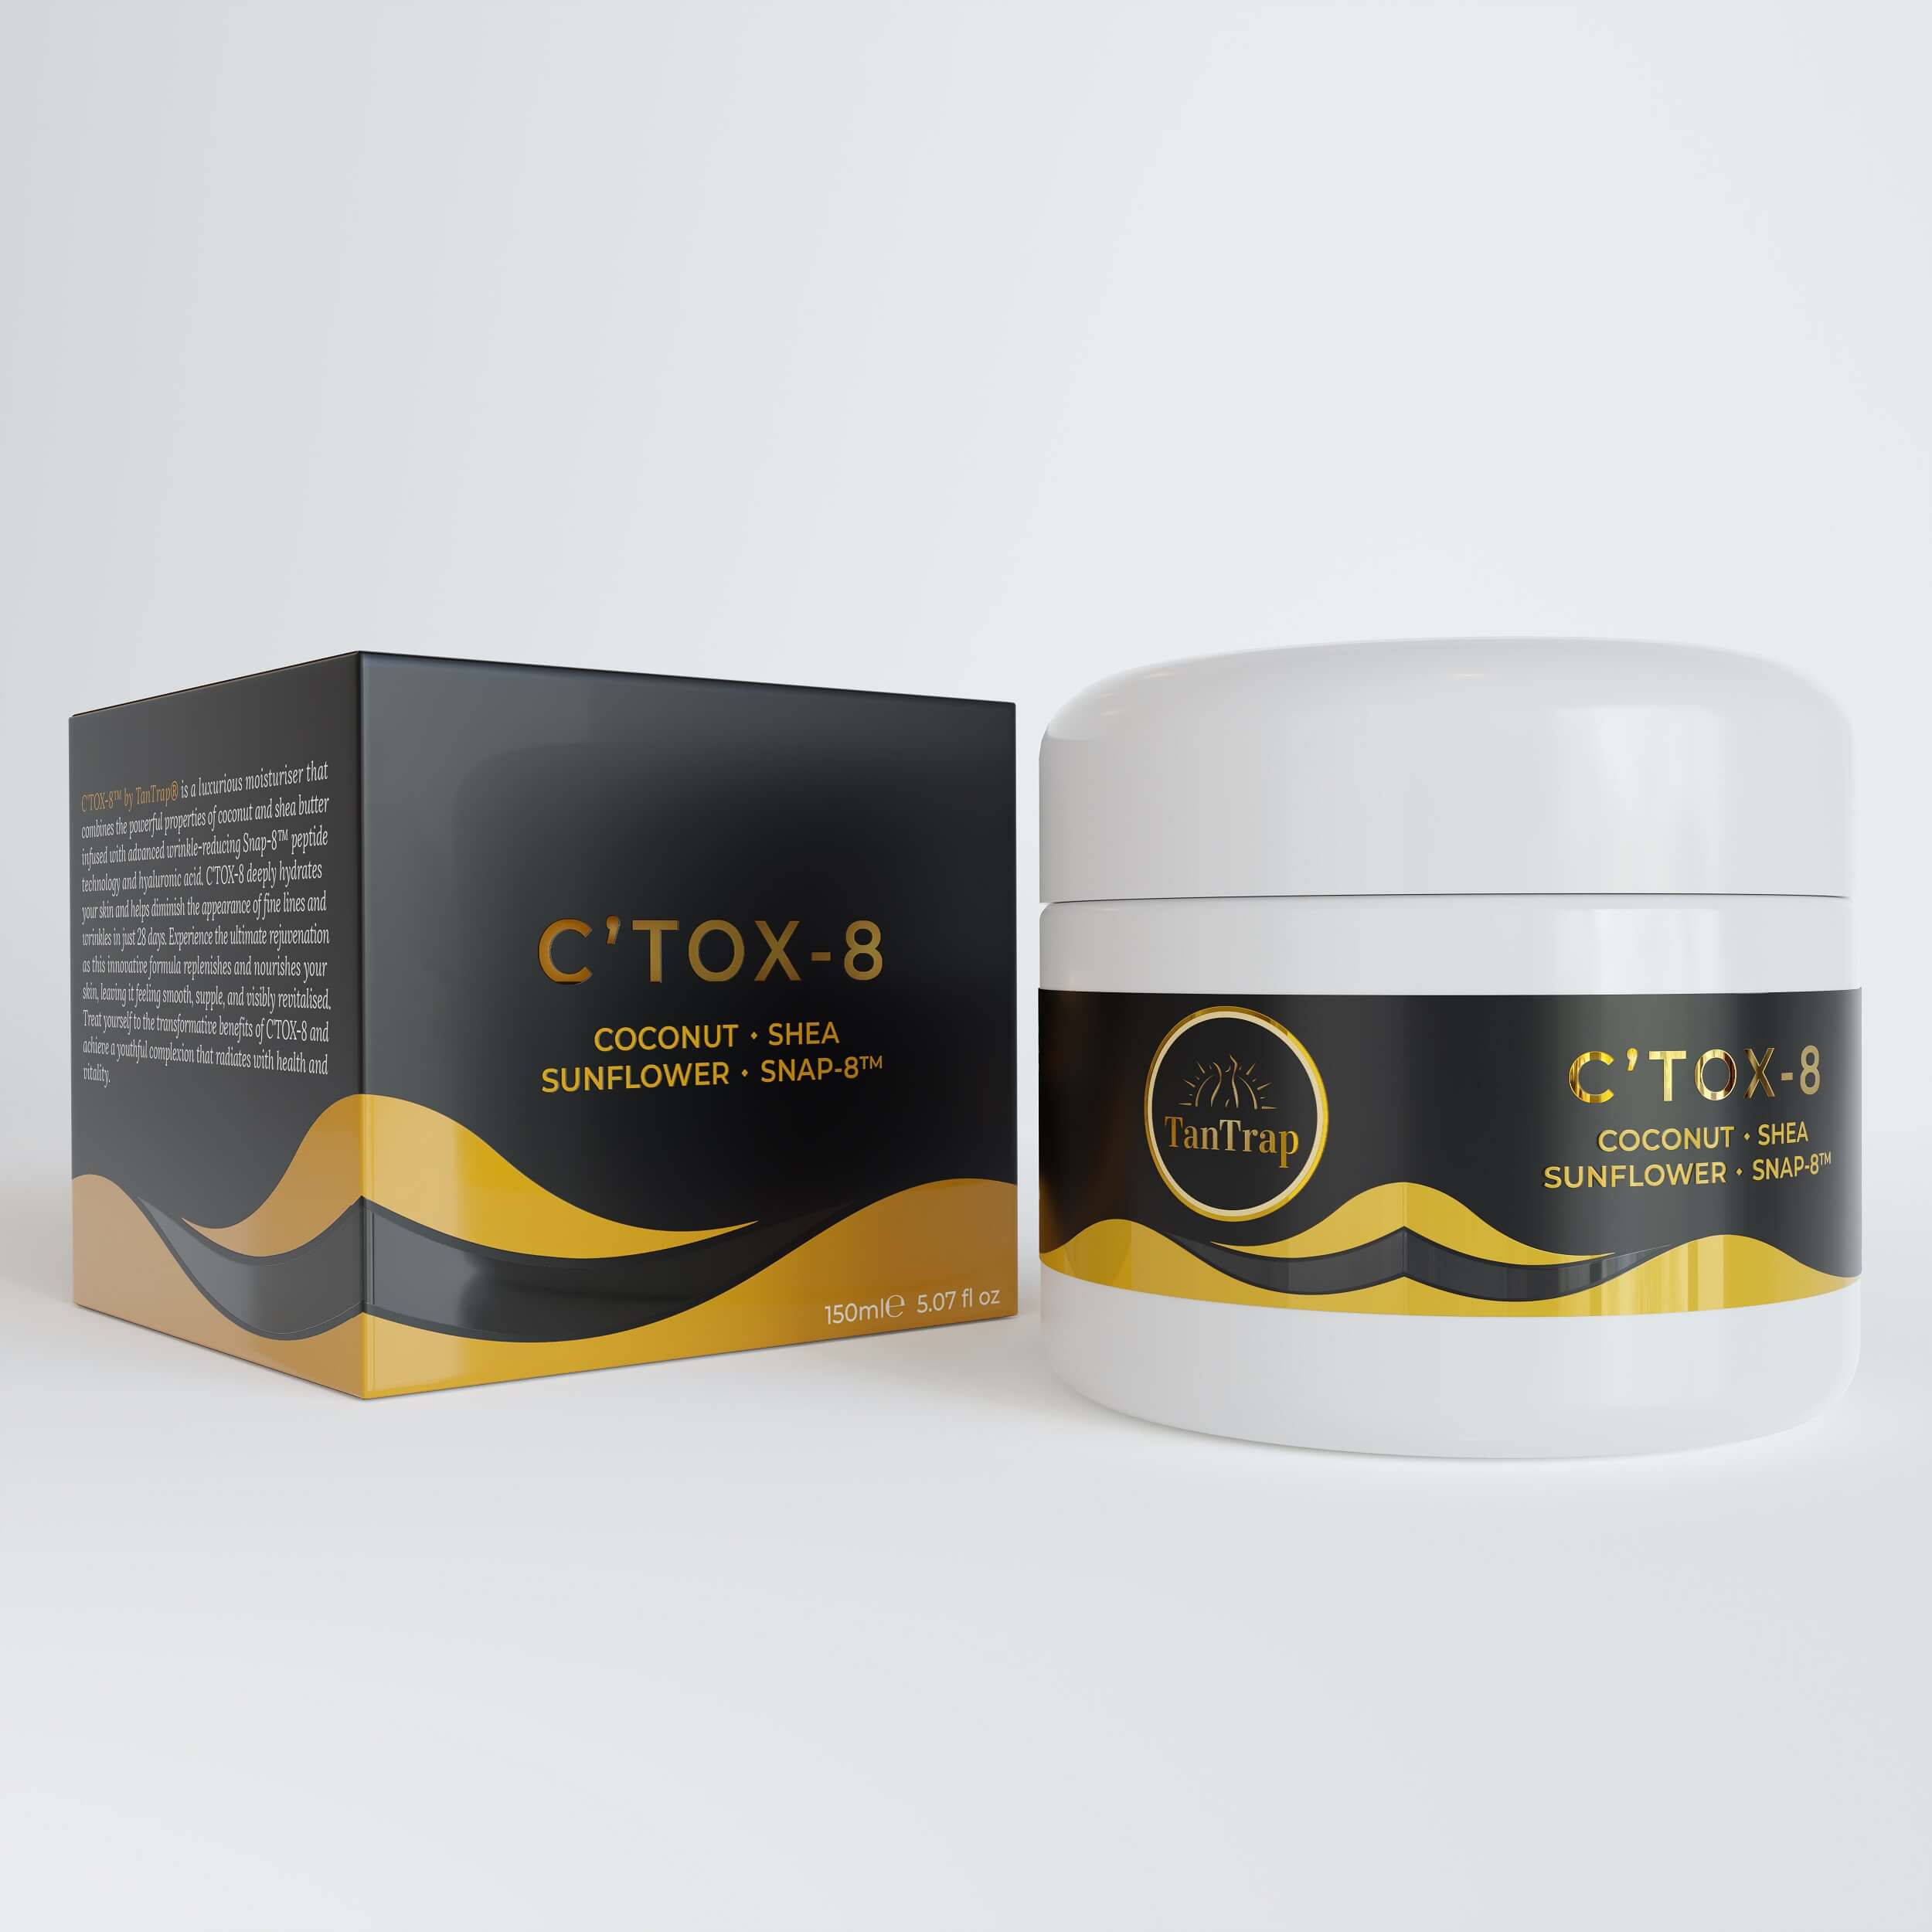 C'TOX-8 by Tantrap wrinkle reducing cream coconut and shea butter with snap-8 peptide technology